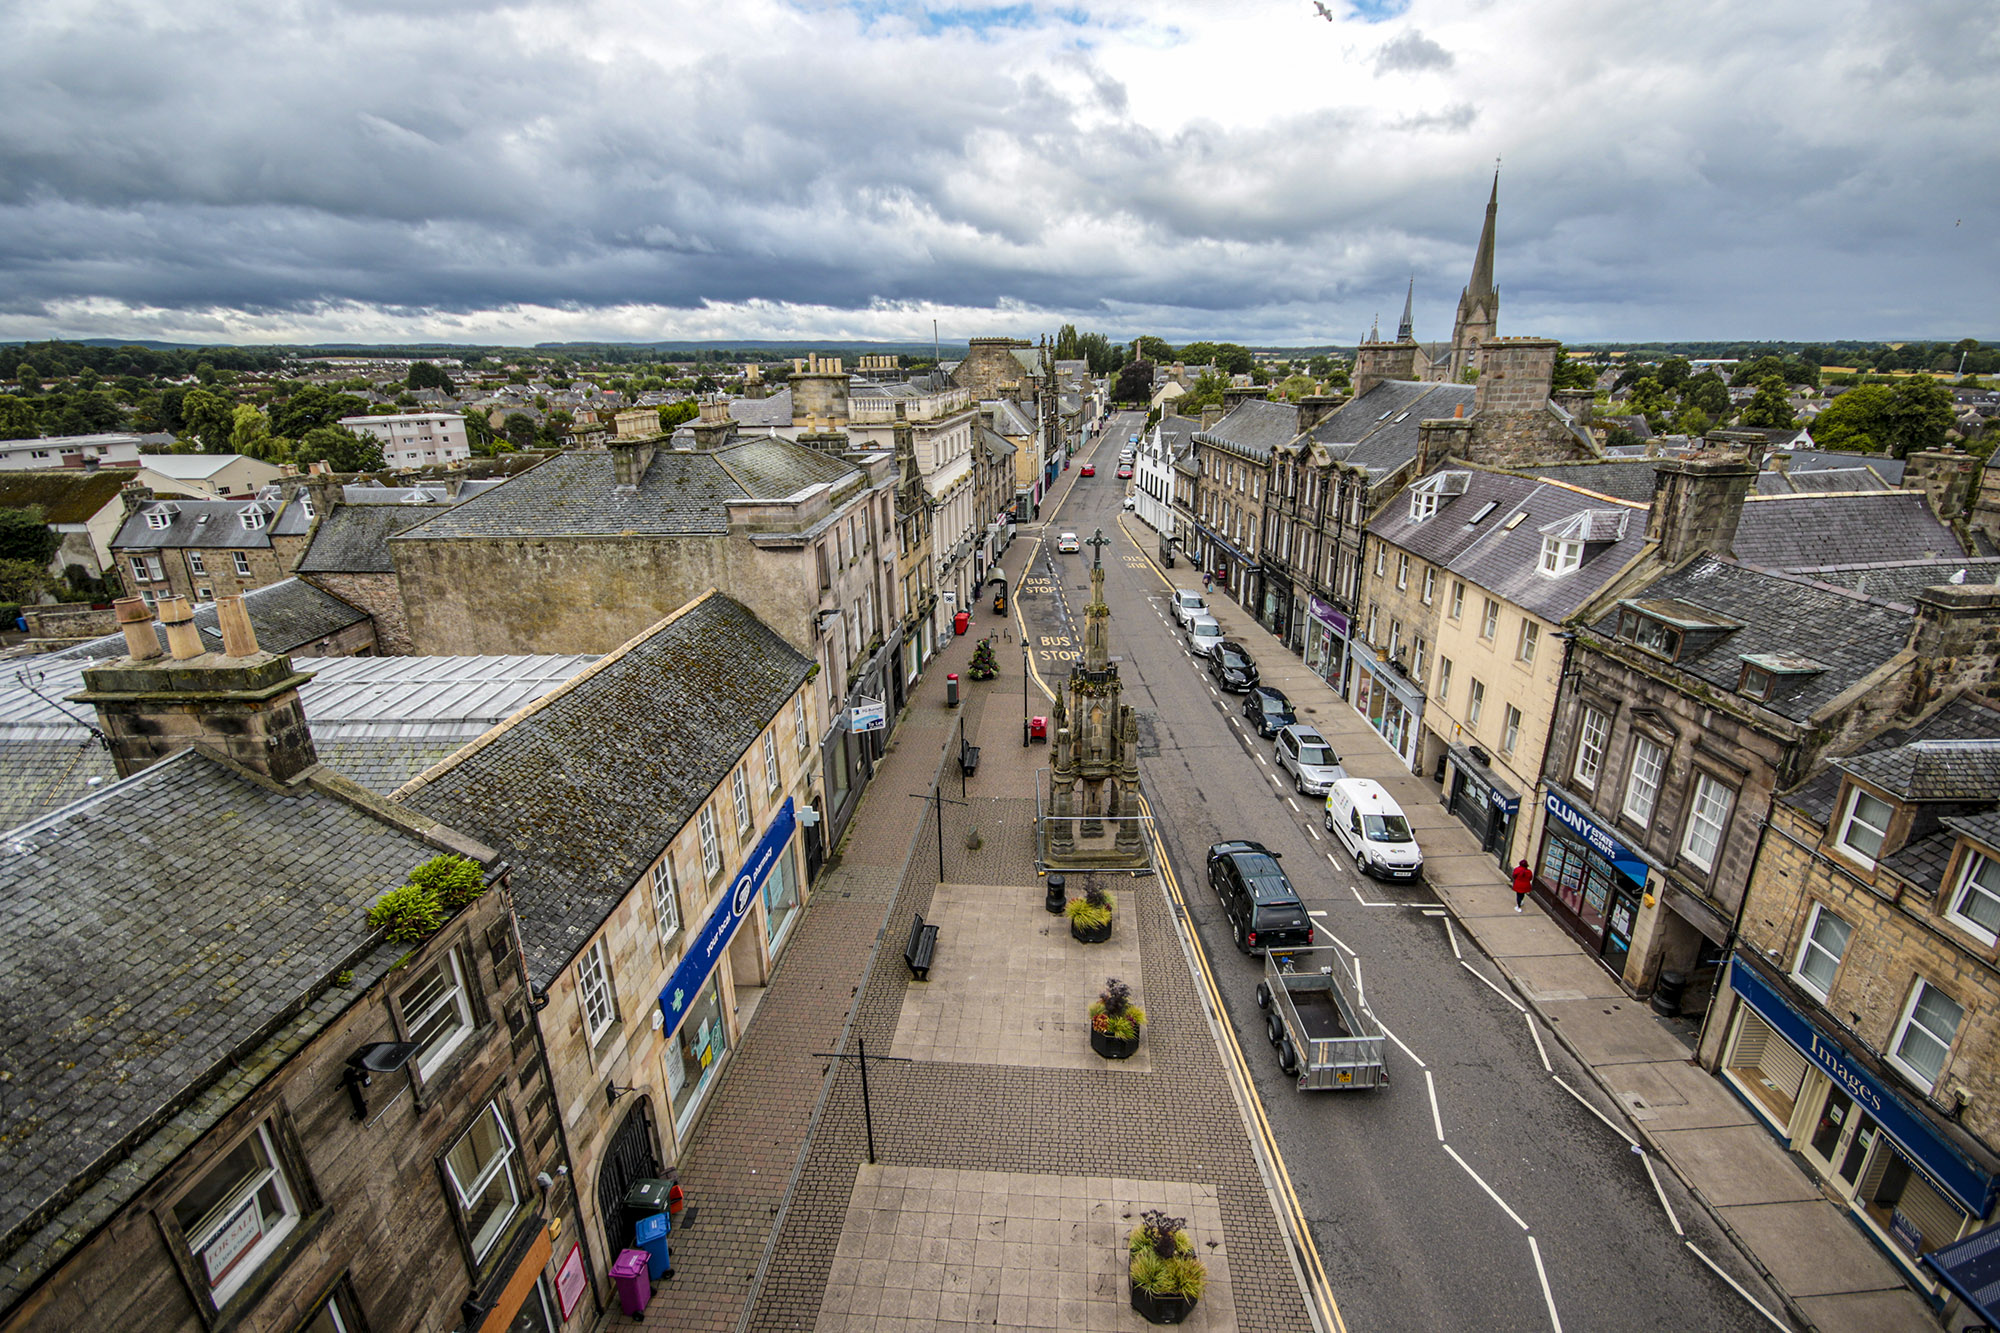 Forres Tolbooth tours